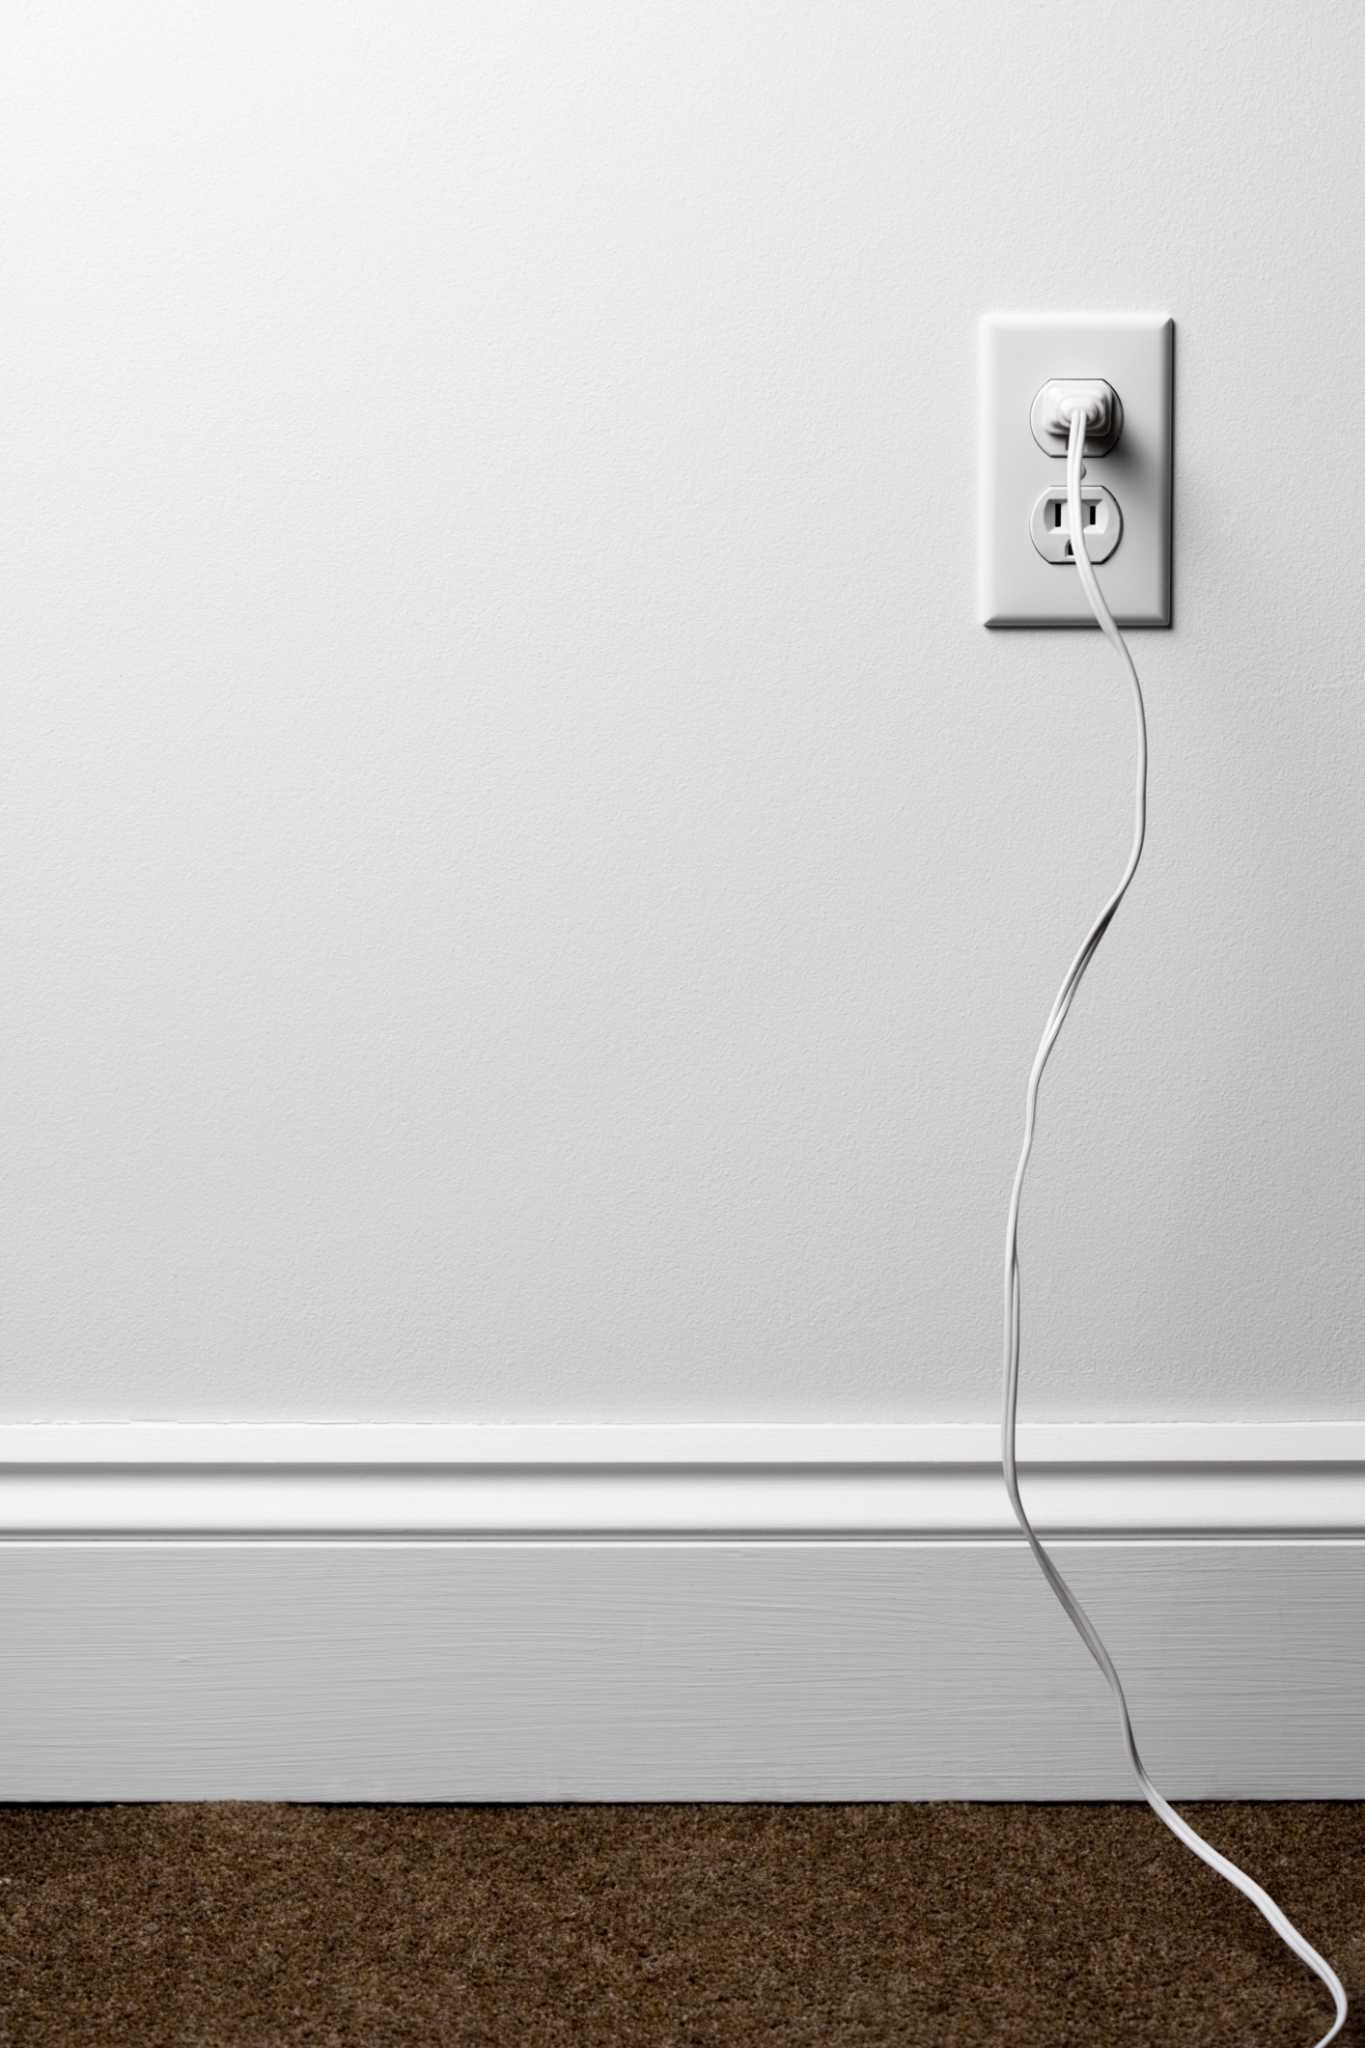 How to Hide Cords Against Baseboards